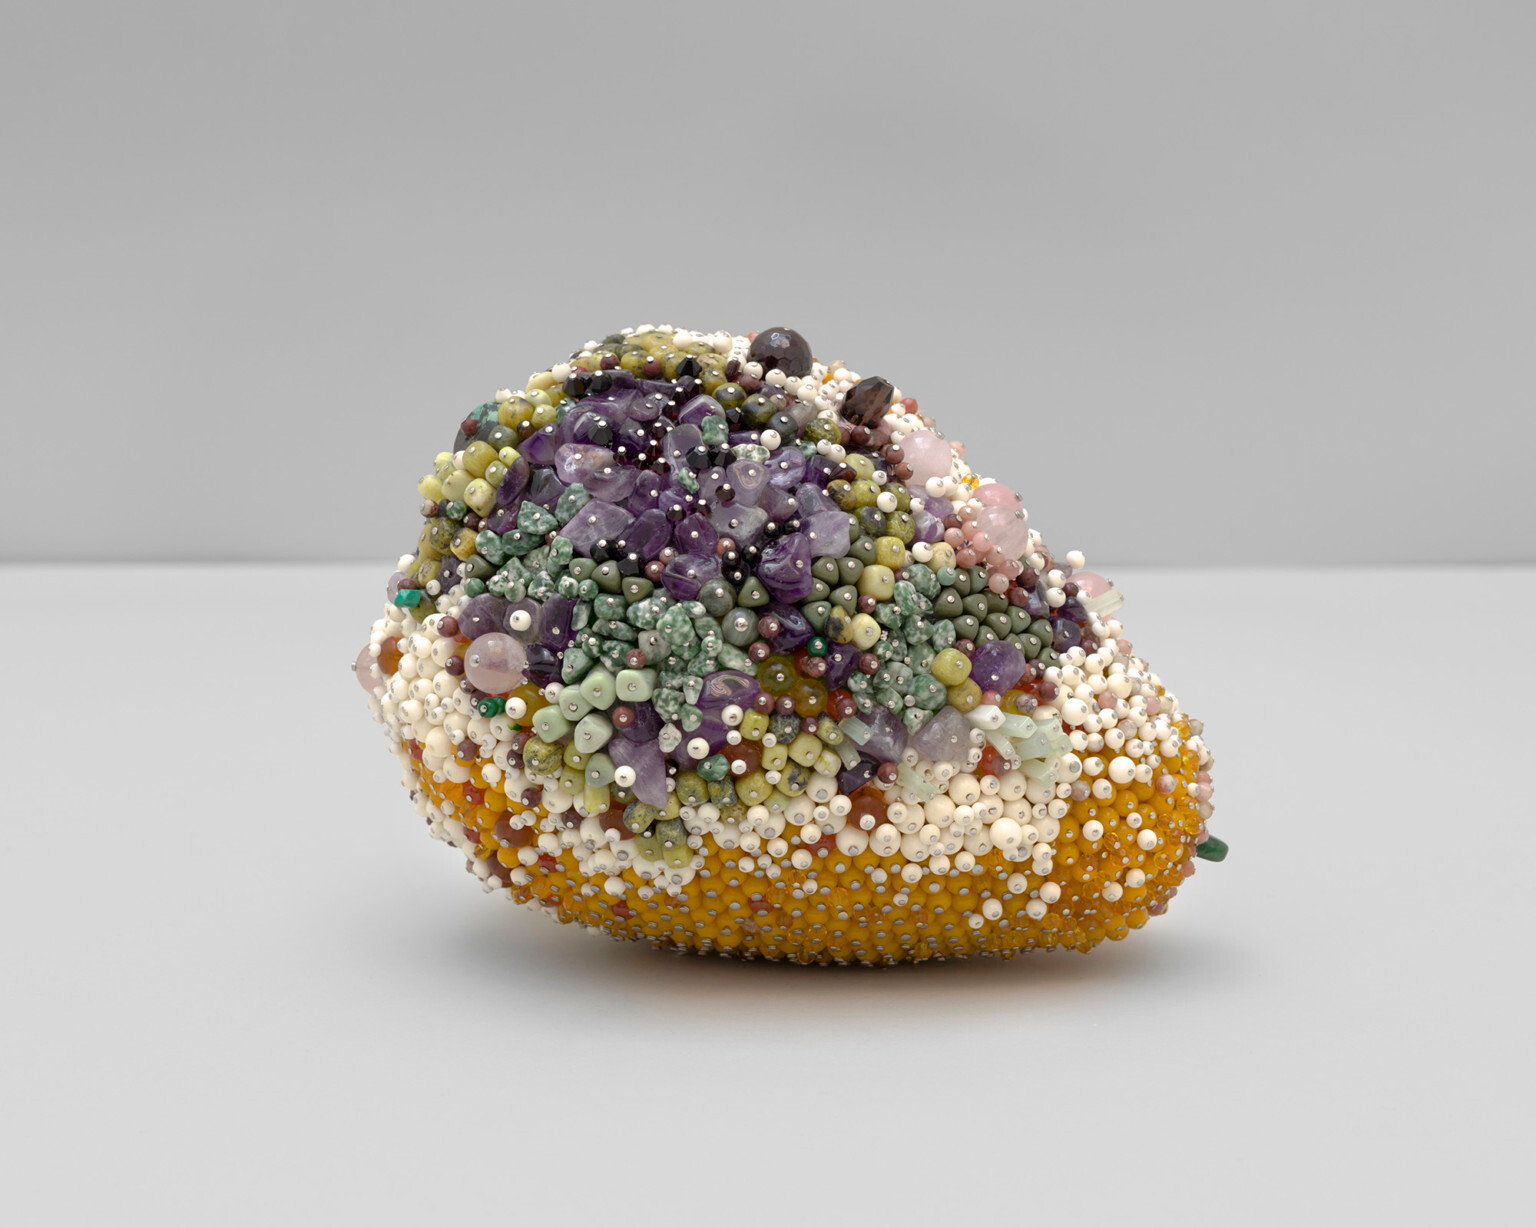 Artist Kathleen Ryan's dazzling jewel art, which often takes the form of decaying fruit